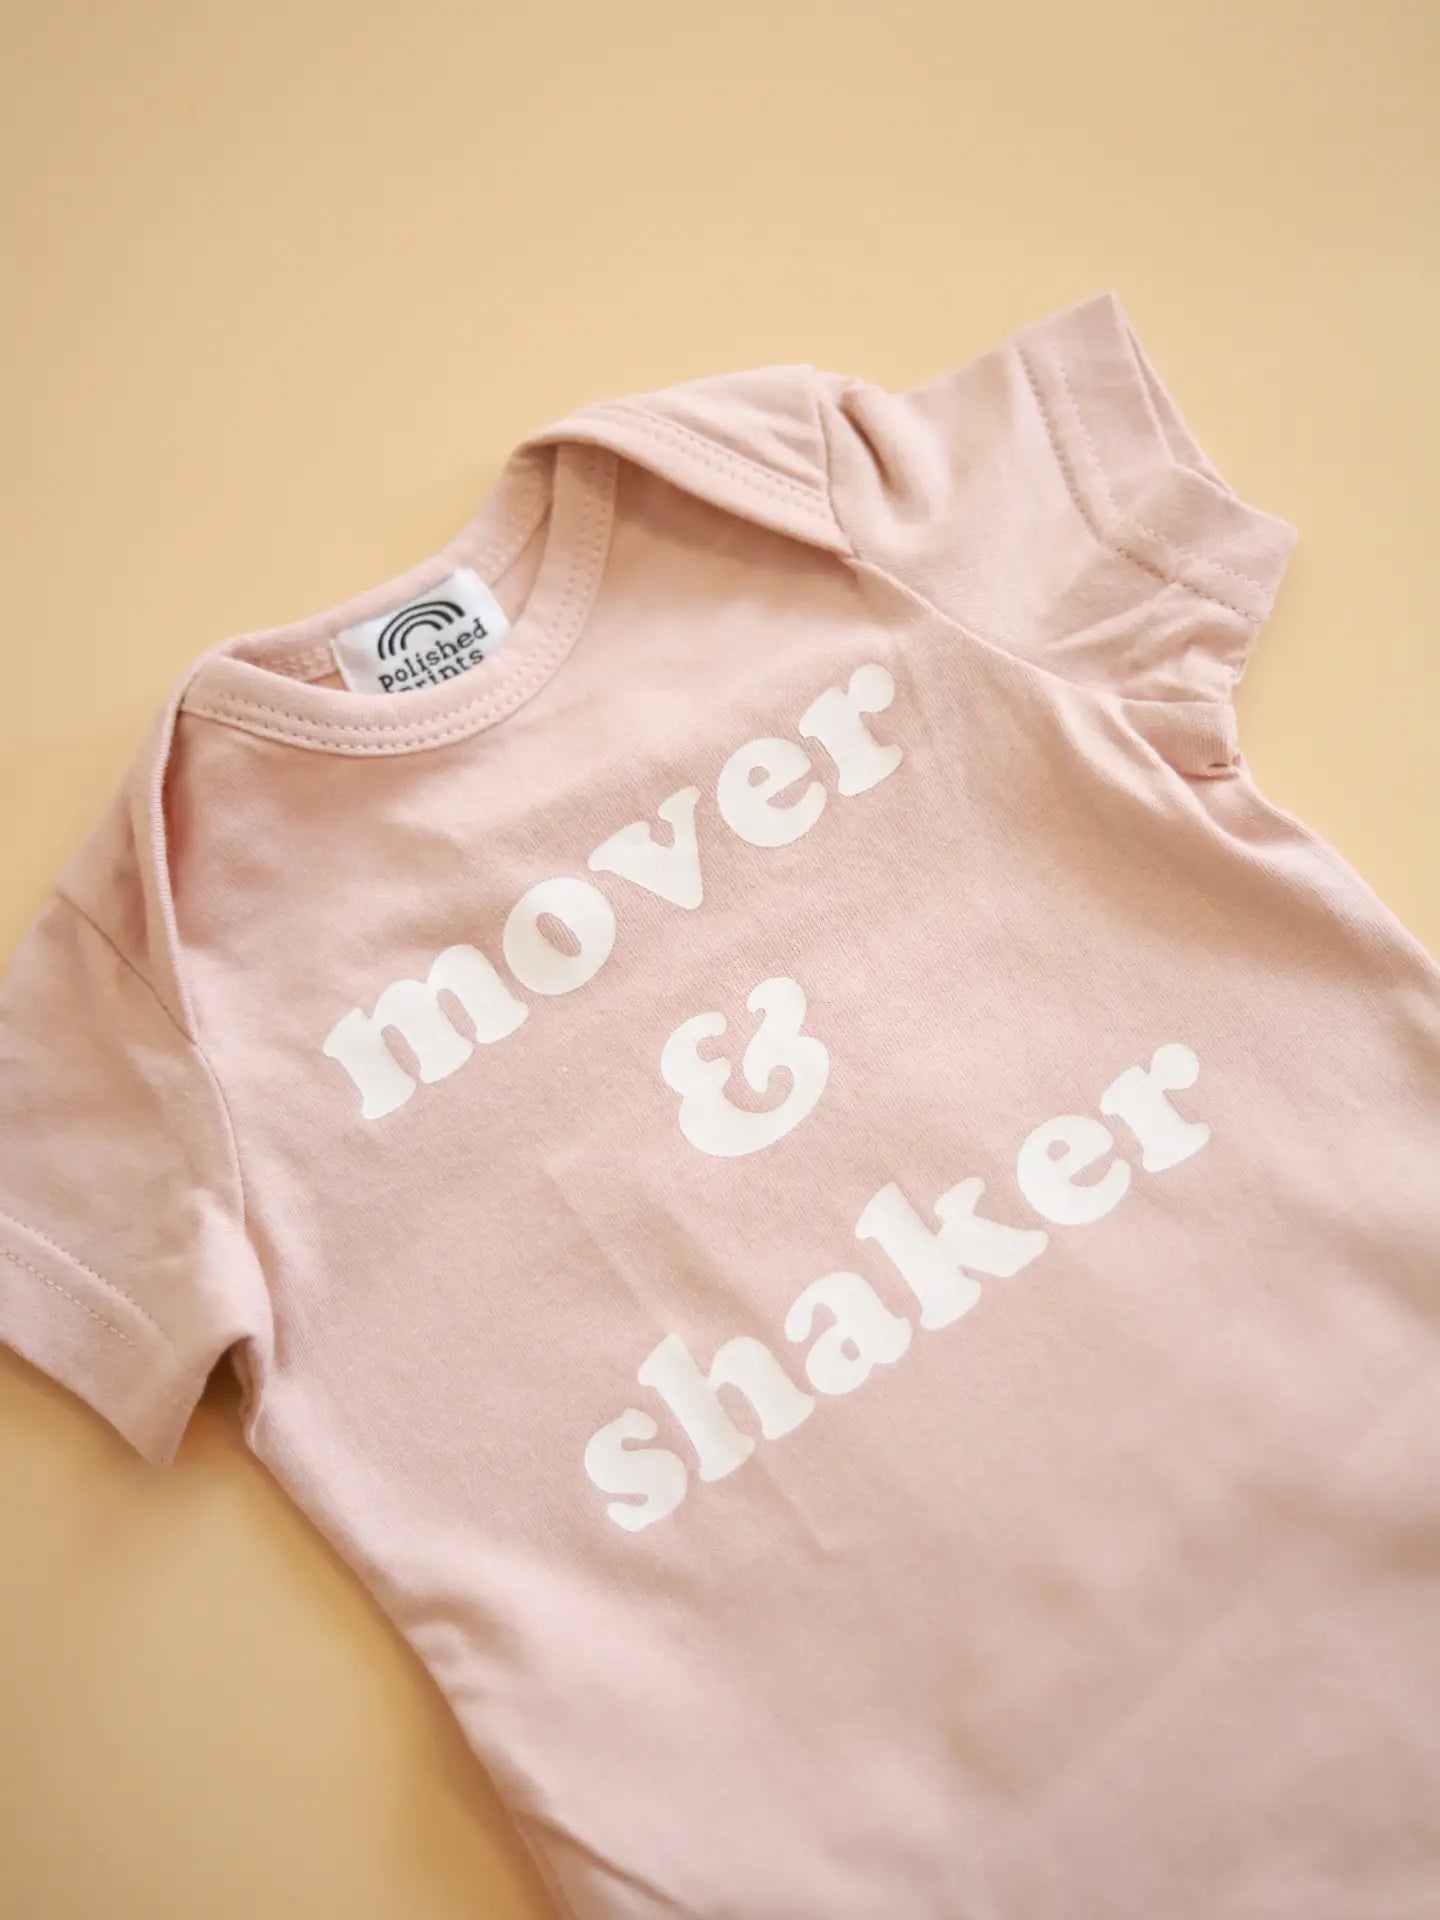 Mover and Shaker Organic Cotton Onsie